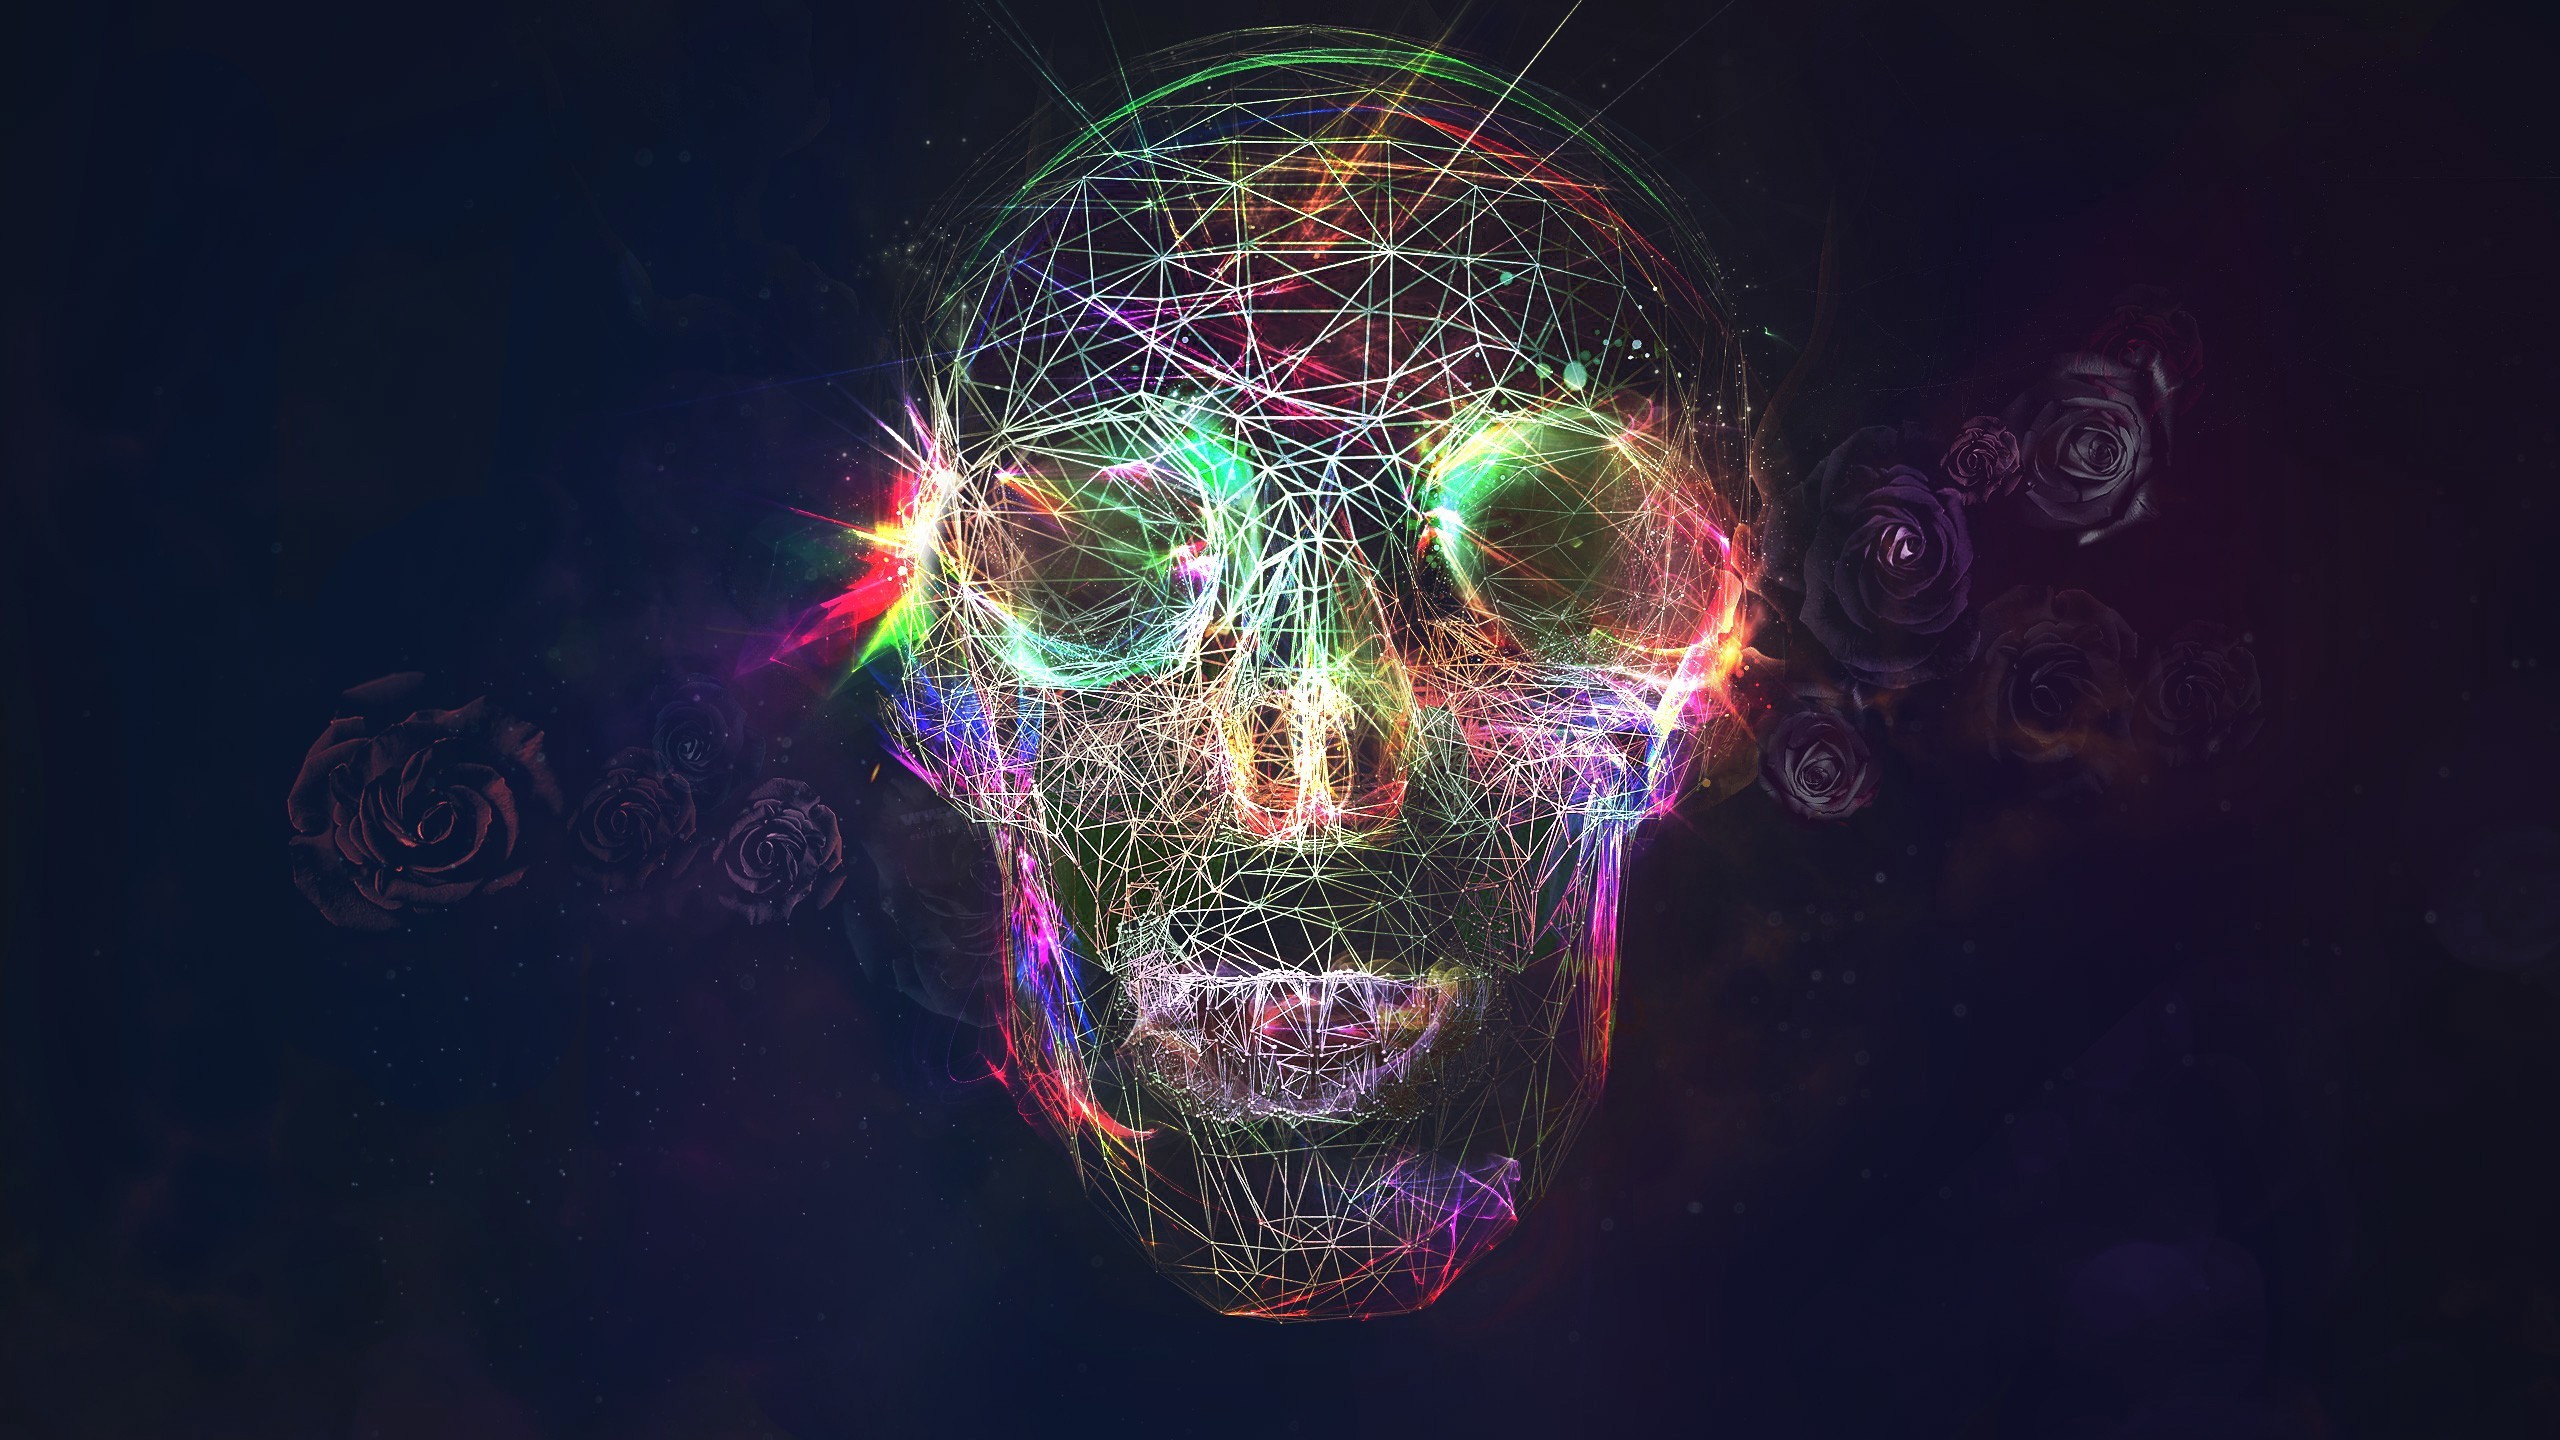 2560x1440 Abstract Skull Backgrounds Wallpapers - http://hdwallpapersf.com/abstract- skull